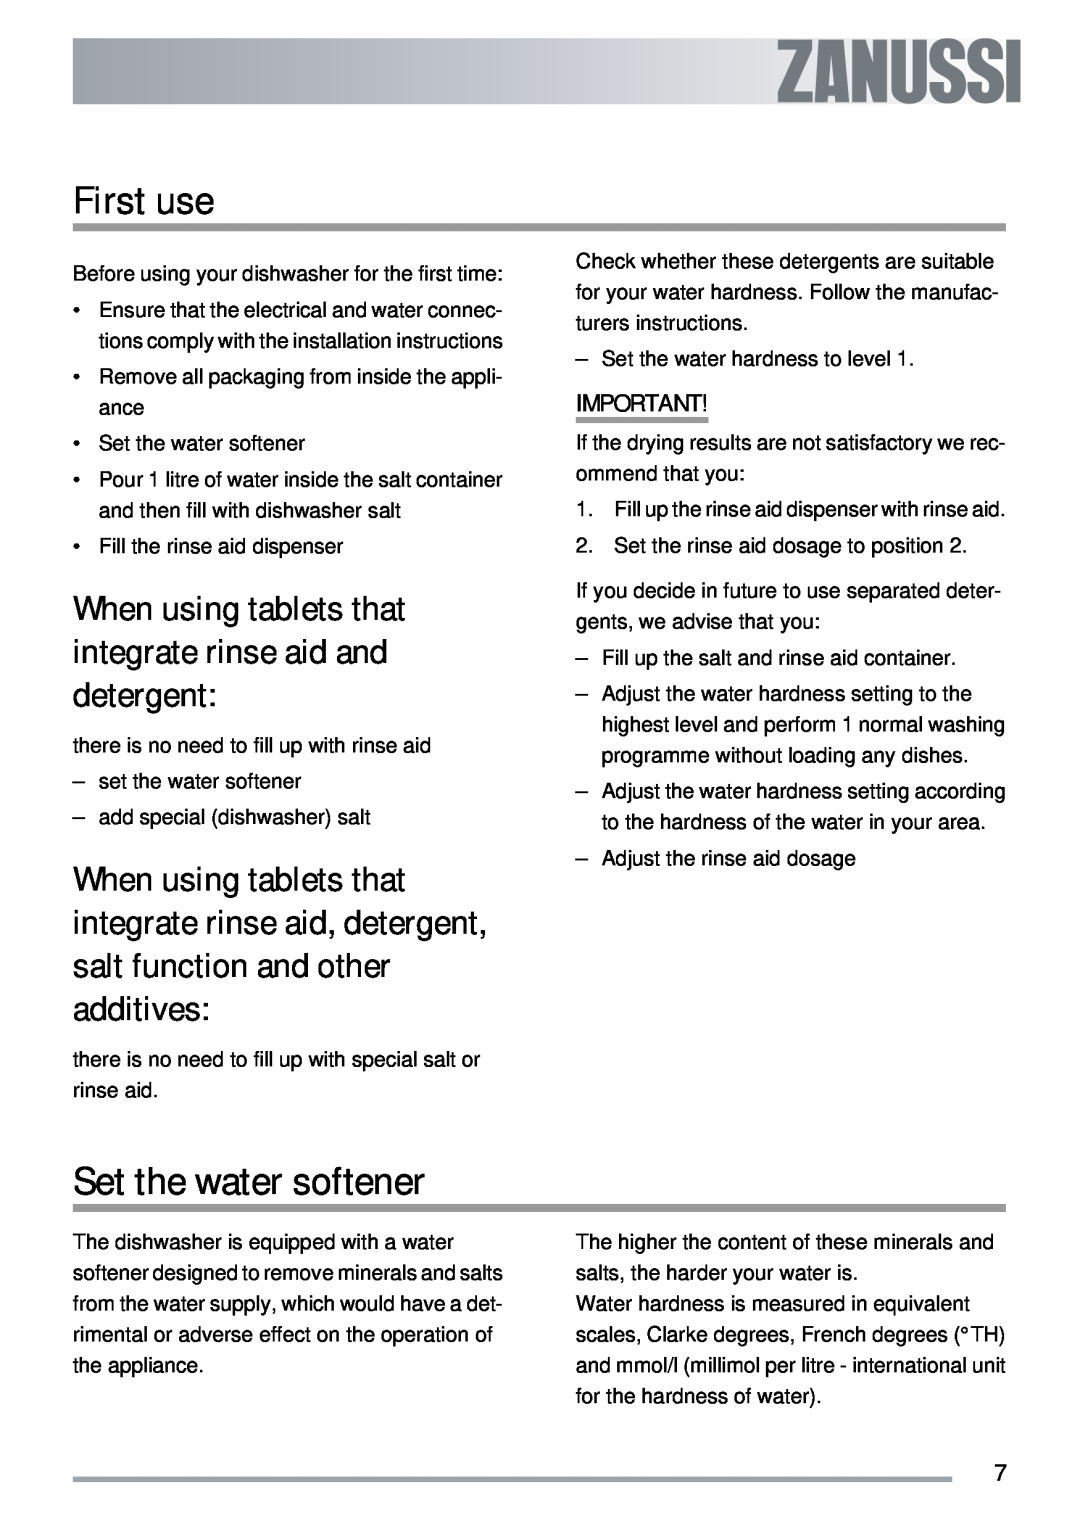 Zanussi ZDI 122 user manual First use, Set the water softener, When using tablets that integrate rinse aid and detergent 